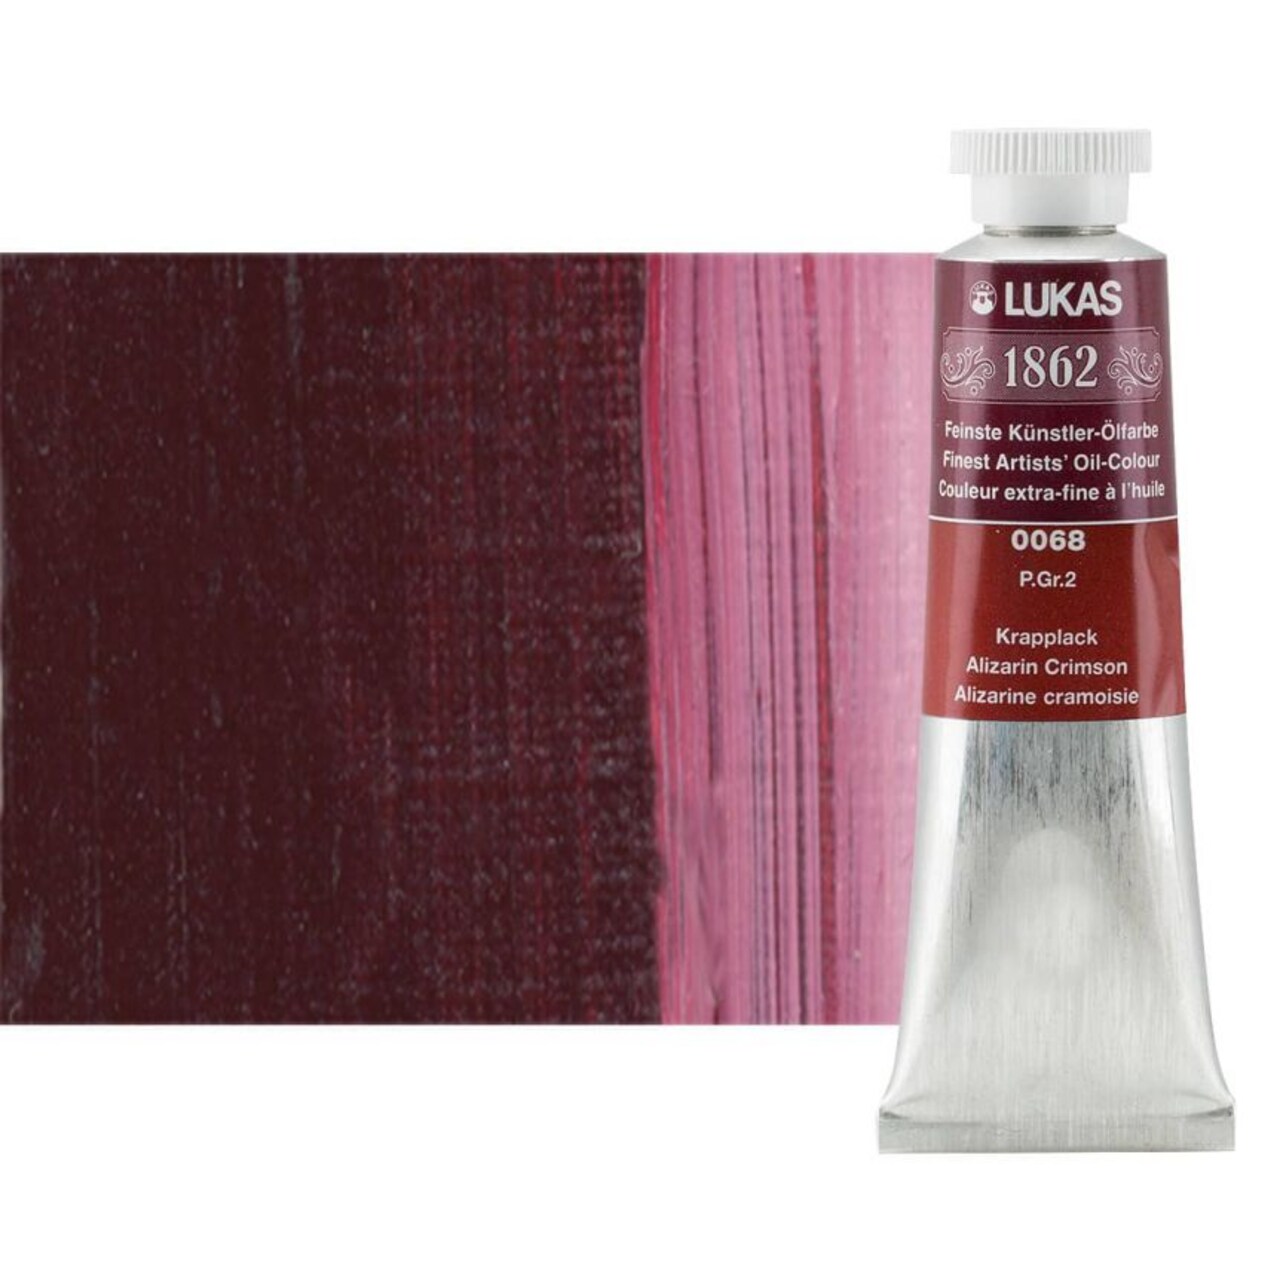 Lukas 1862 Professional Artist Oil Paint - Fast-Drying, Non-Yellowing, Highly Pigmented Oil Paint, Open Stock and Sets